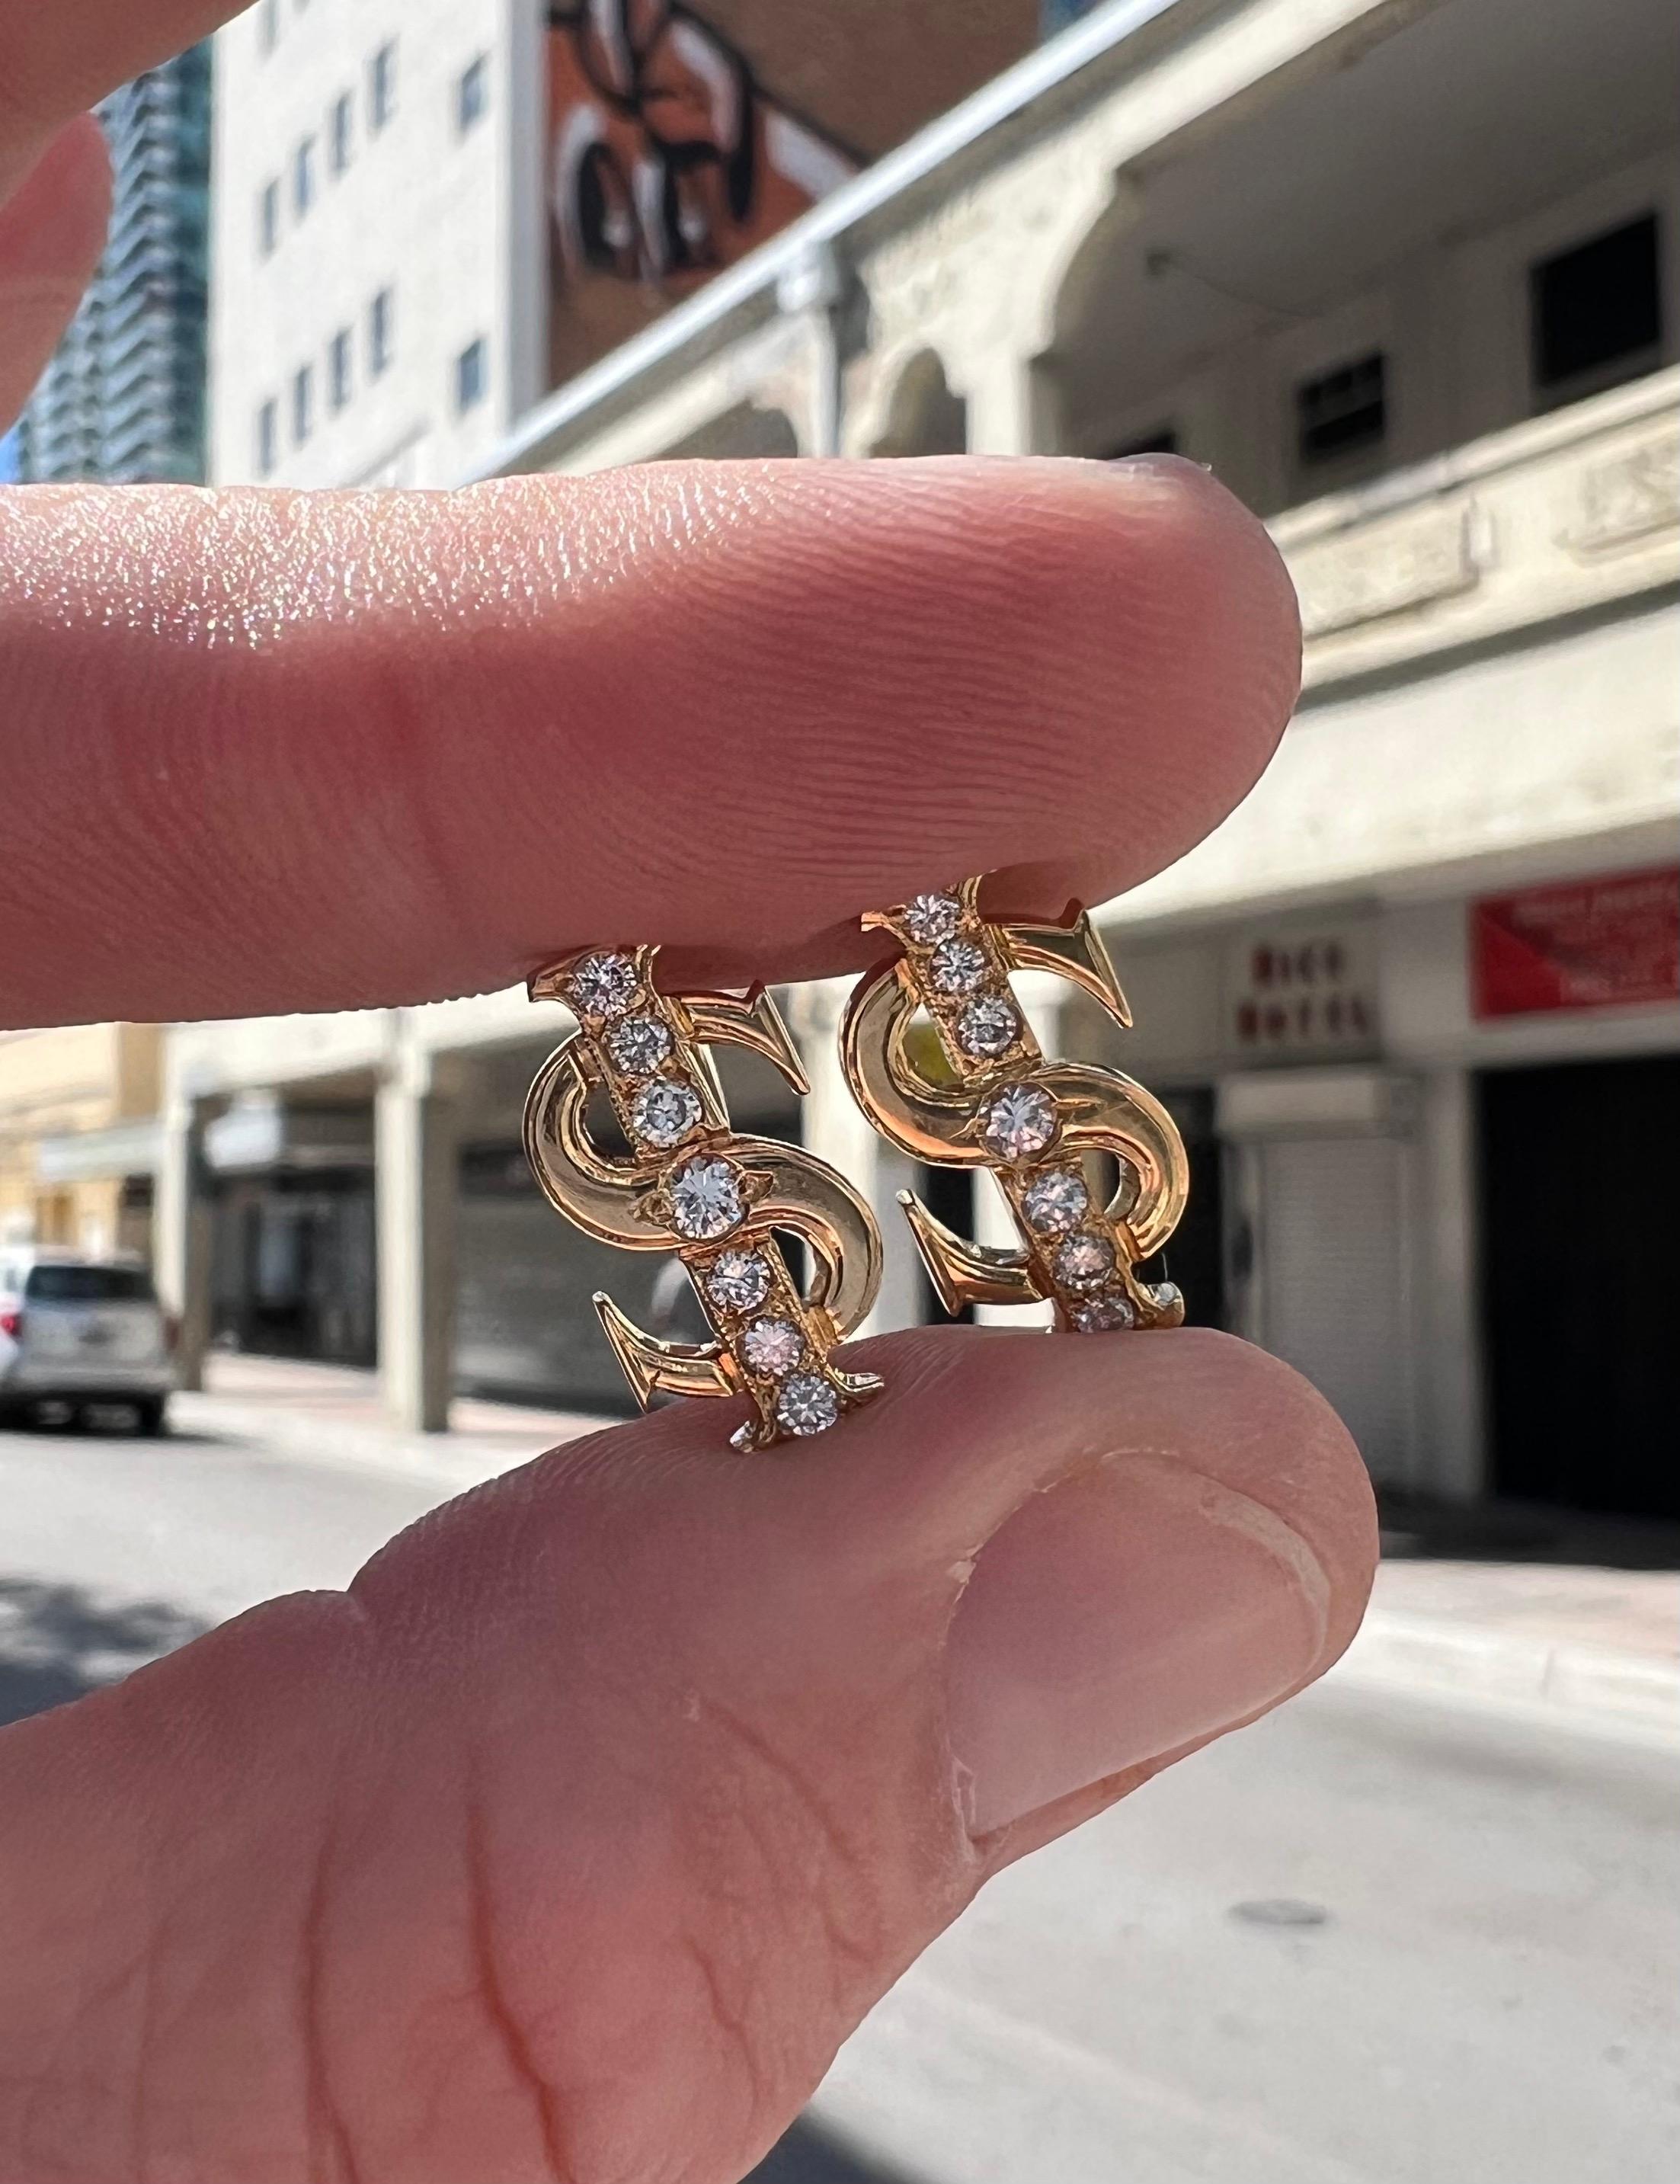 Excellent pair of solid 18k yellow gold cuff links. The pair depict dollar signs with a row of round brilliant cut diamonds set along the center. The diamonds in the pair weigh approximately 0.75 carat and display white color and Vs/Si clarity.
The